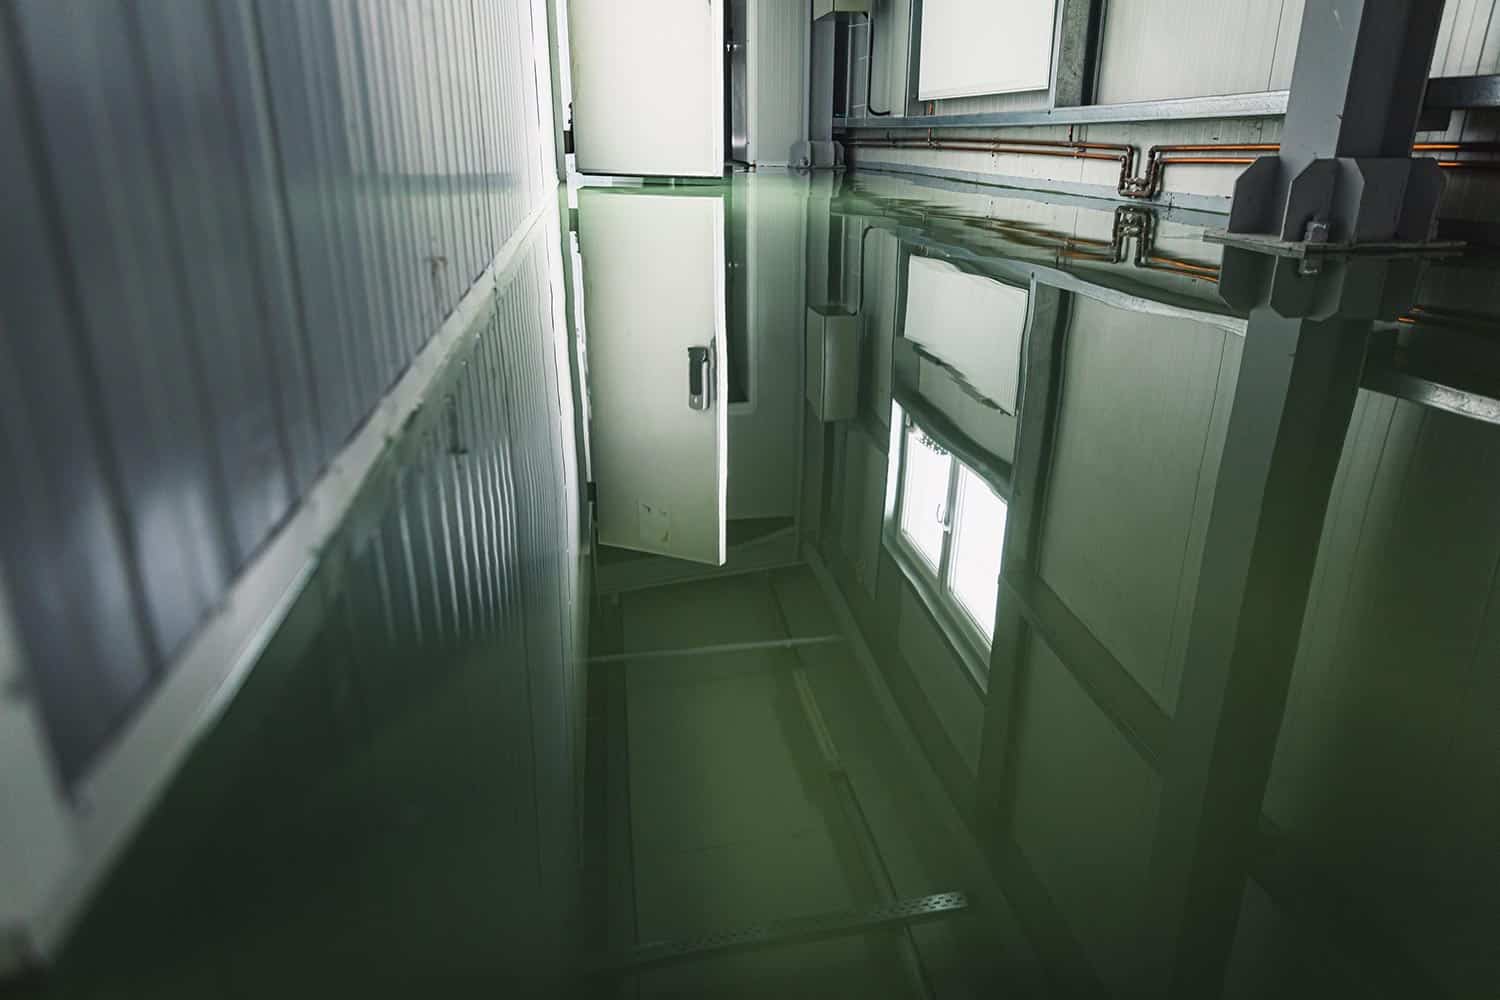 New cold rooms in the butchery industry with green epoxy resin floor